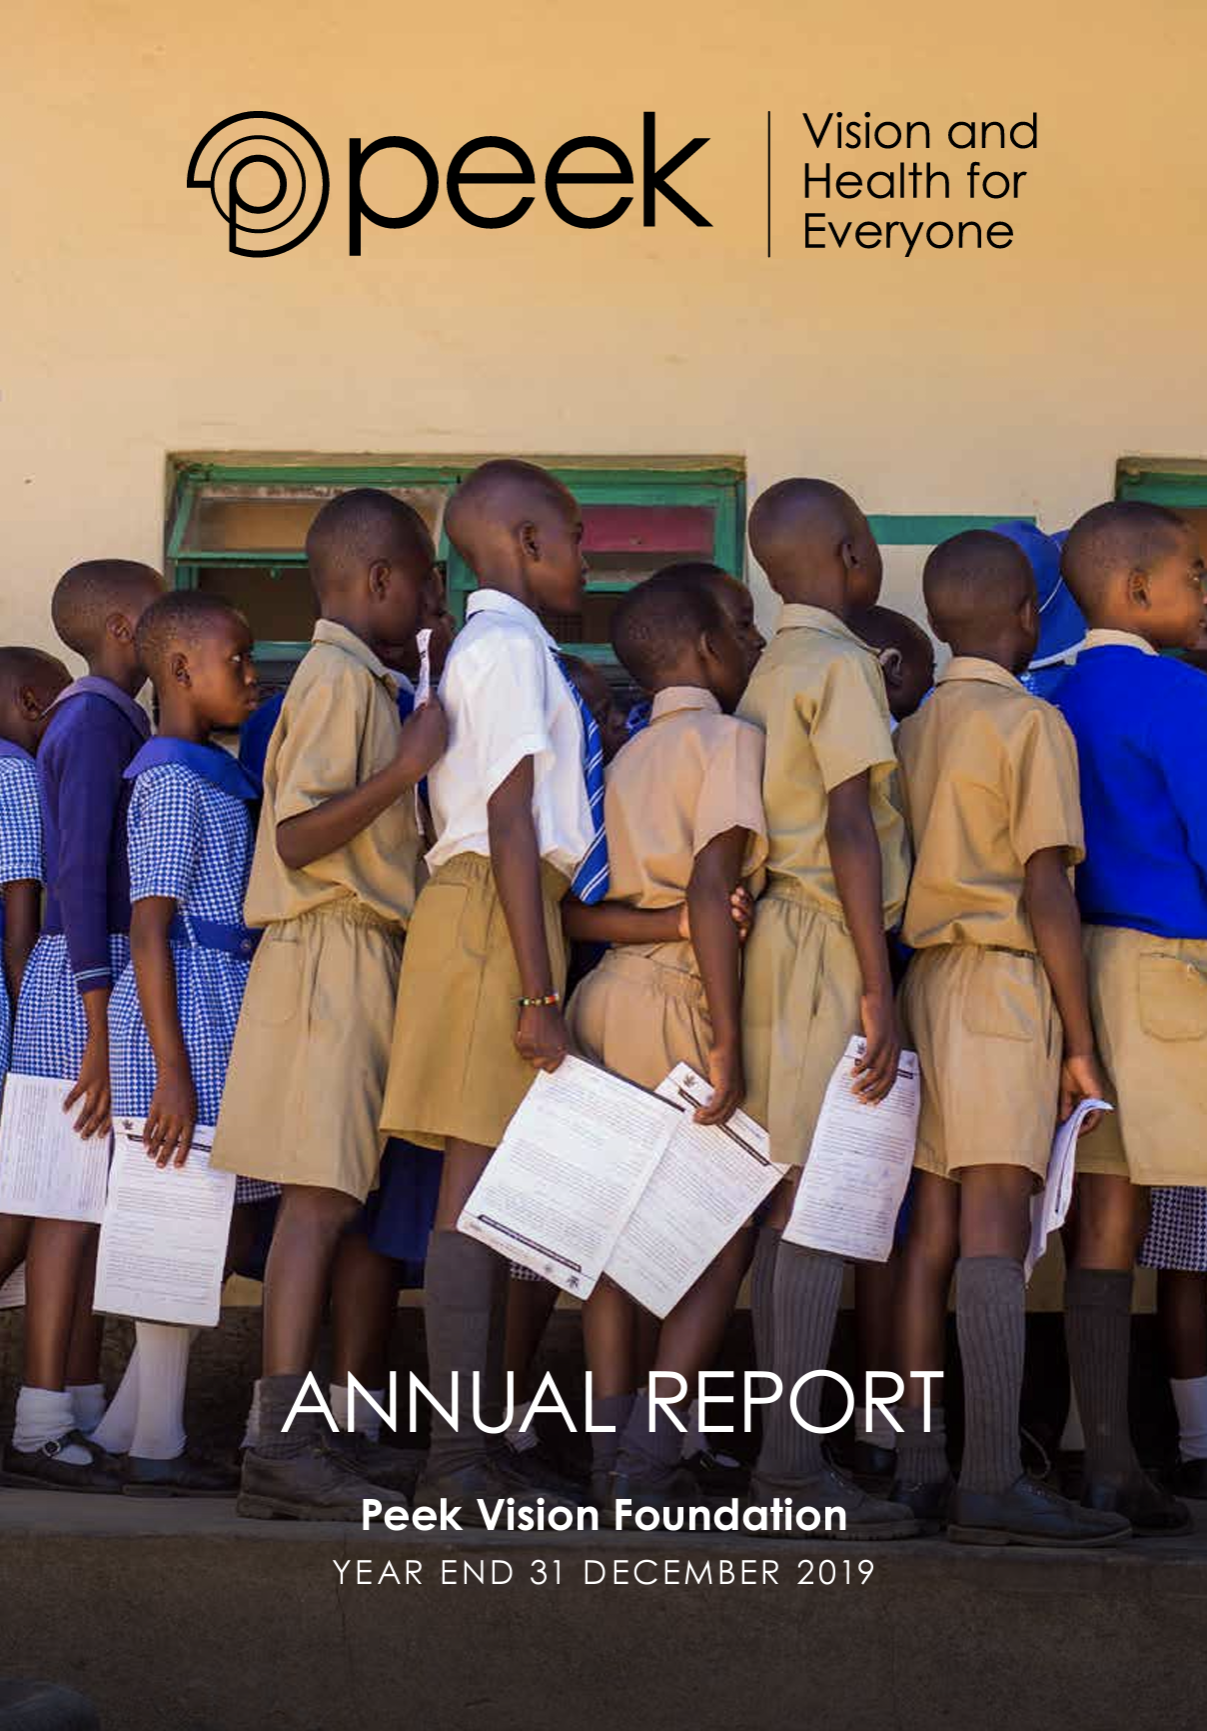 A group of children queue up holding slips of paper as they await their eye test. In front of them the text reads "Peek: Vision and Health for Everyone. Annual Report and Accounts 2019"